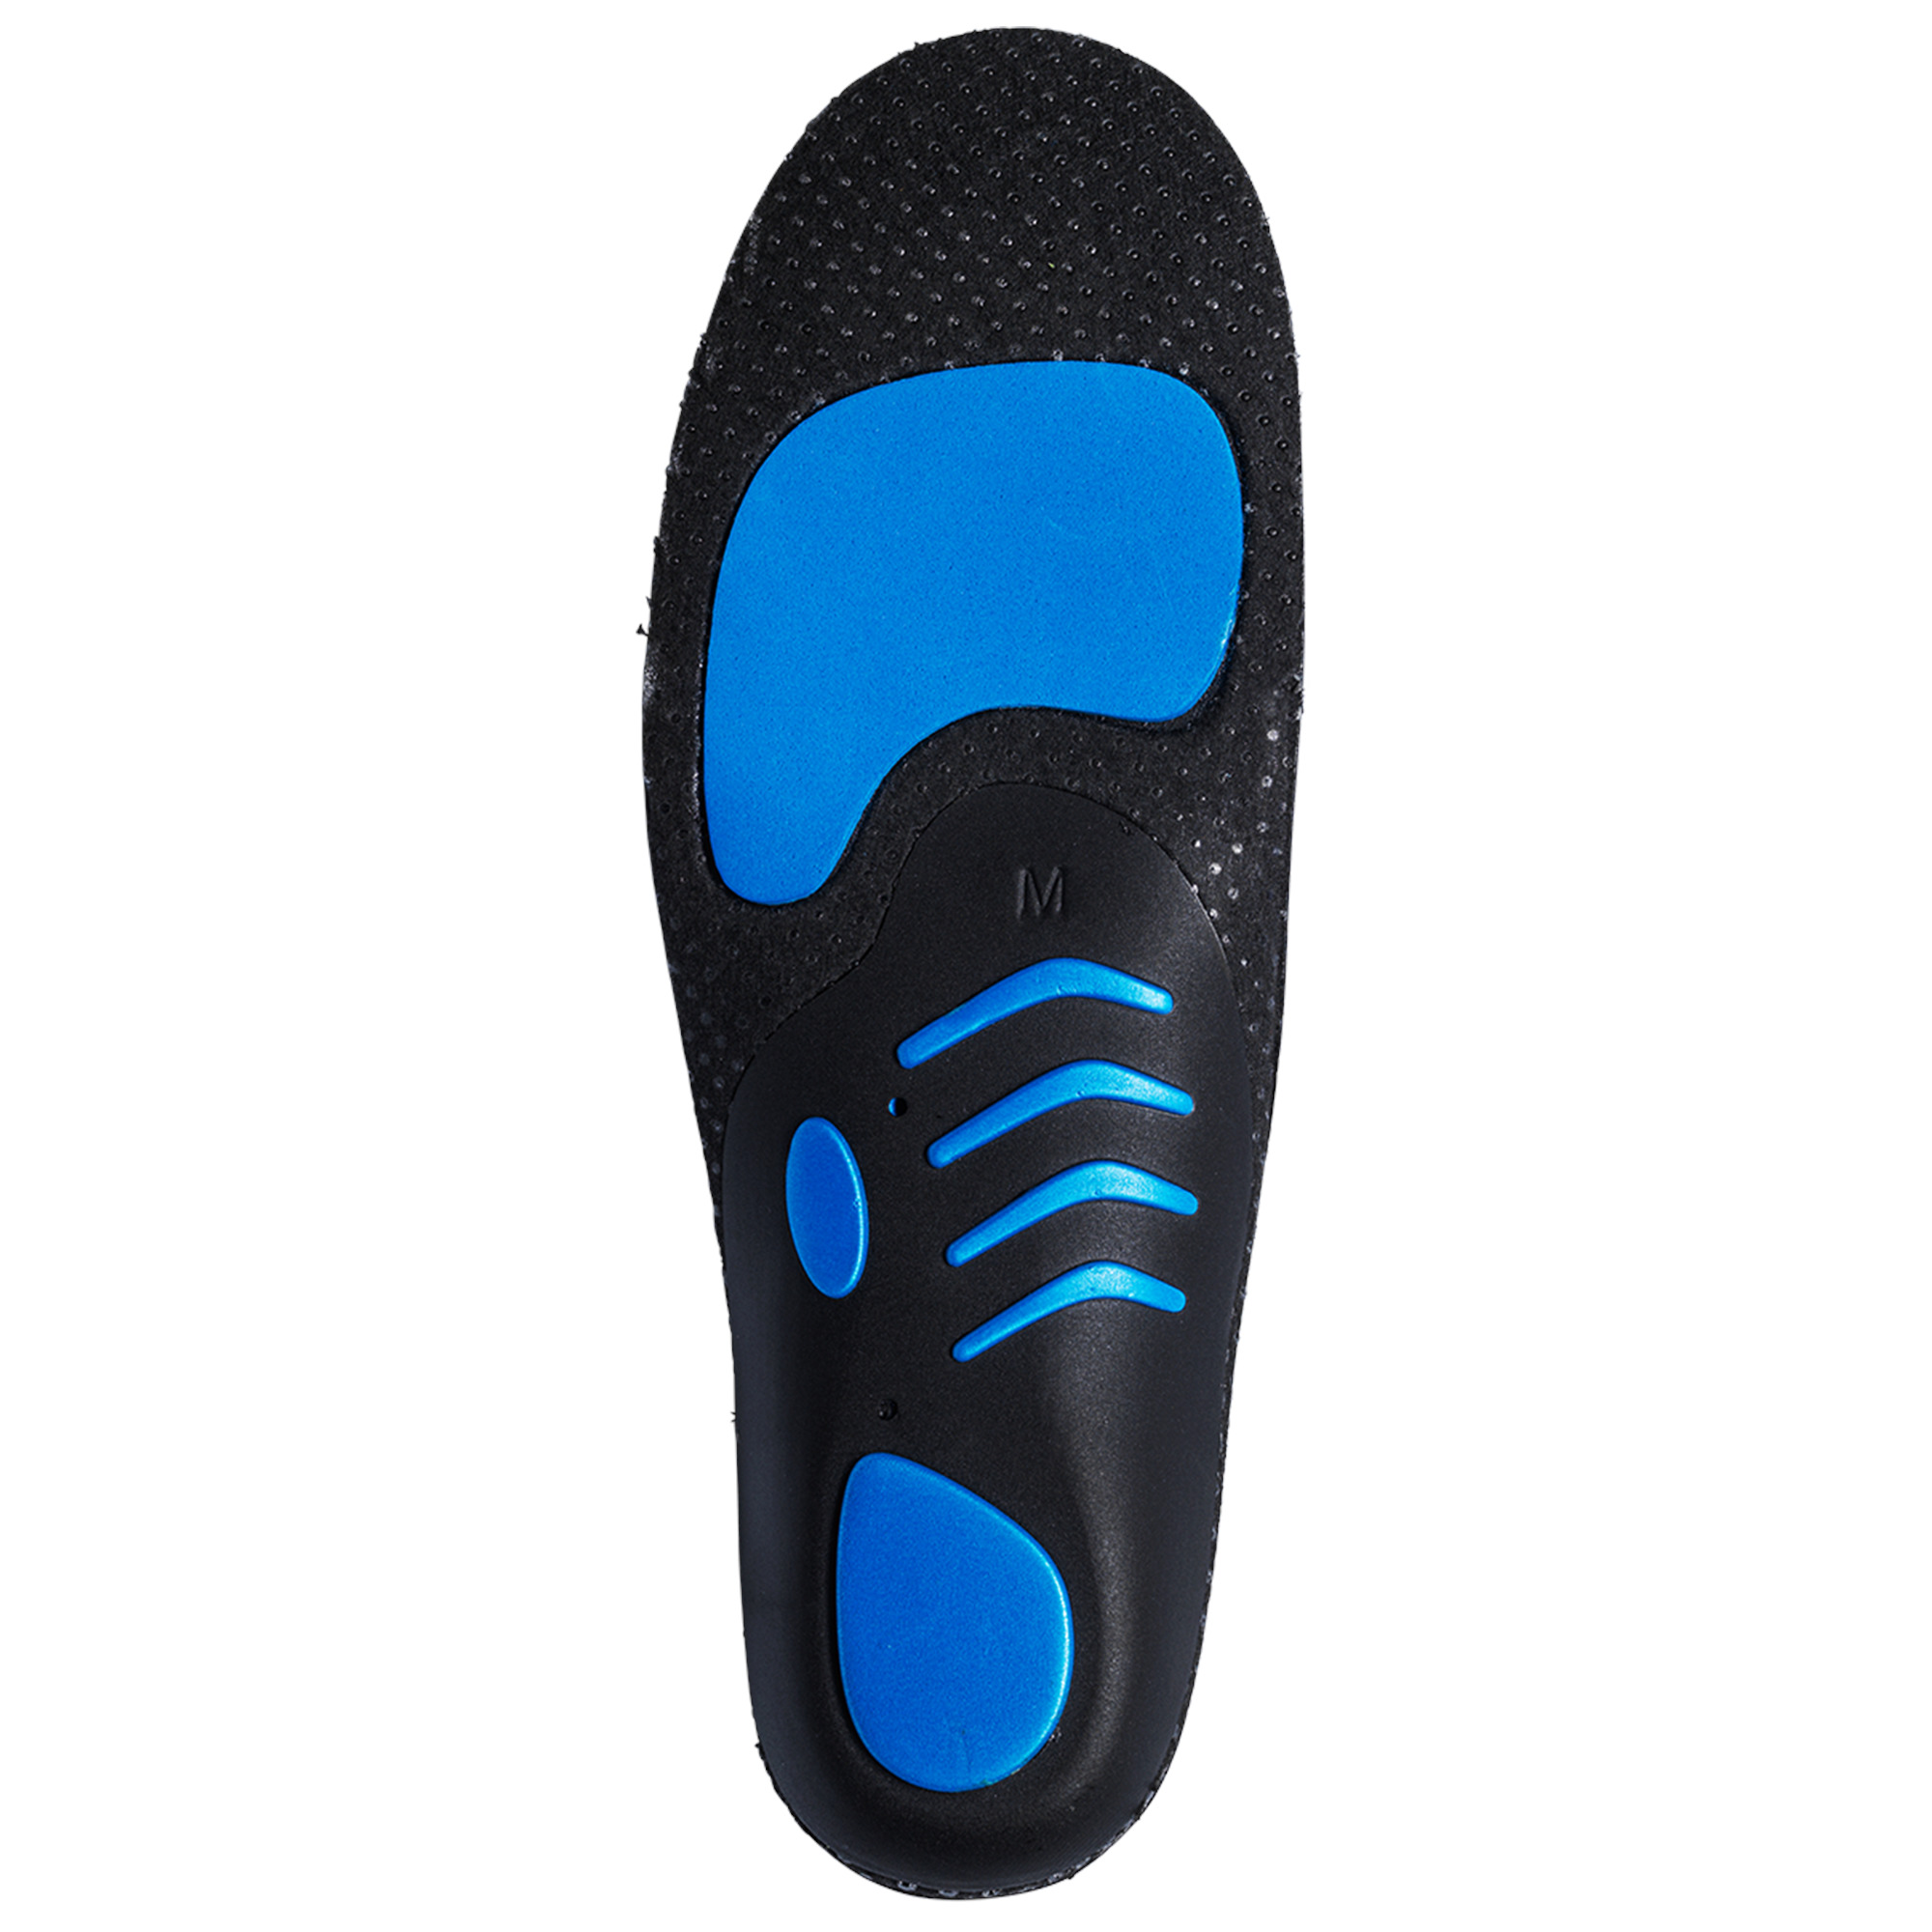 STABILITY Mid Arch insoles